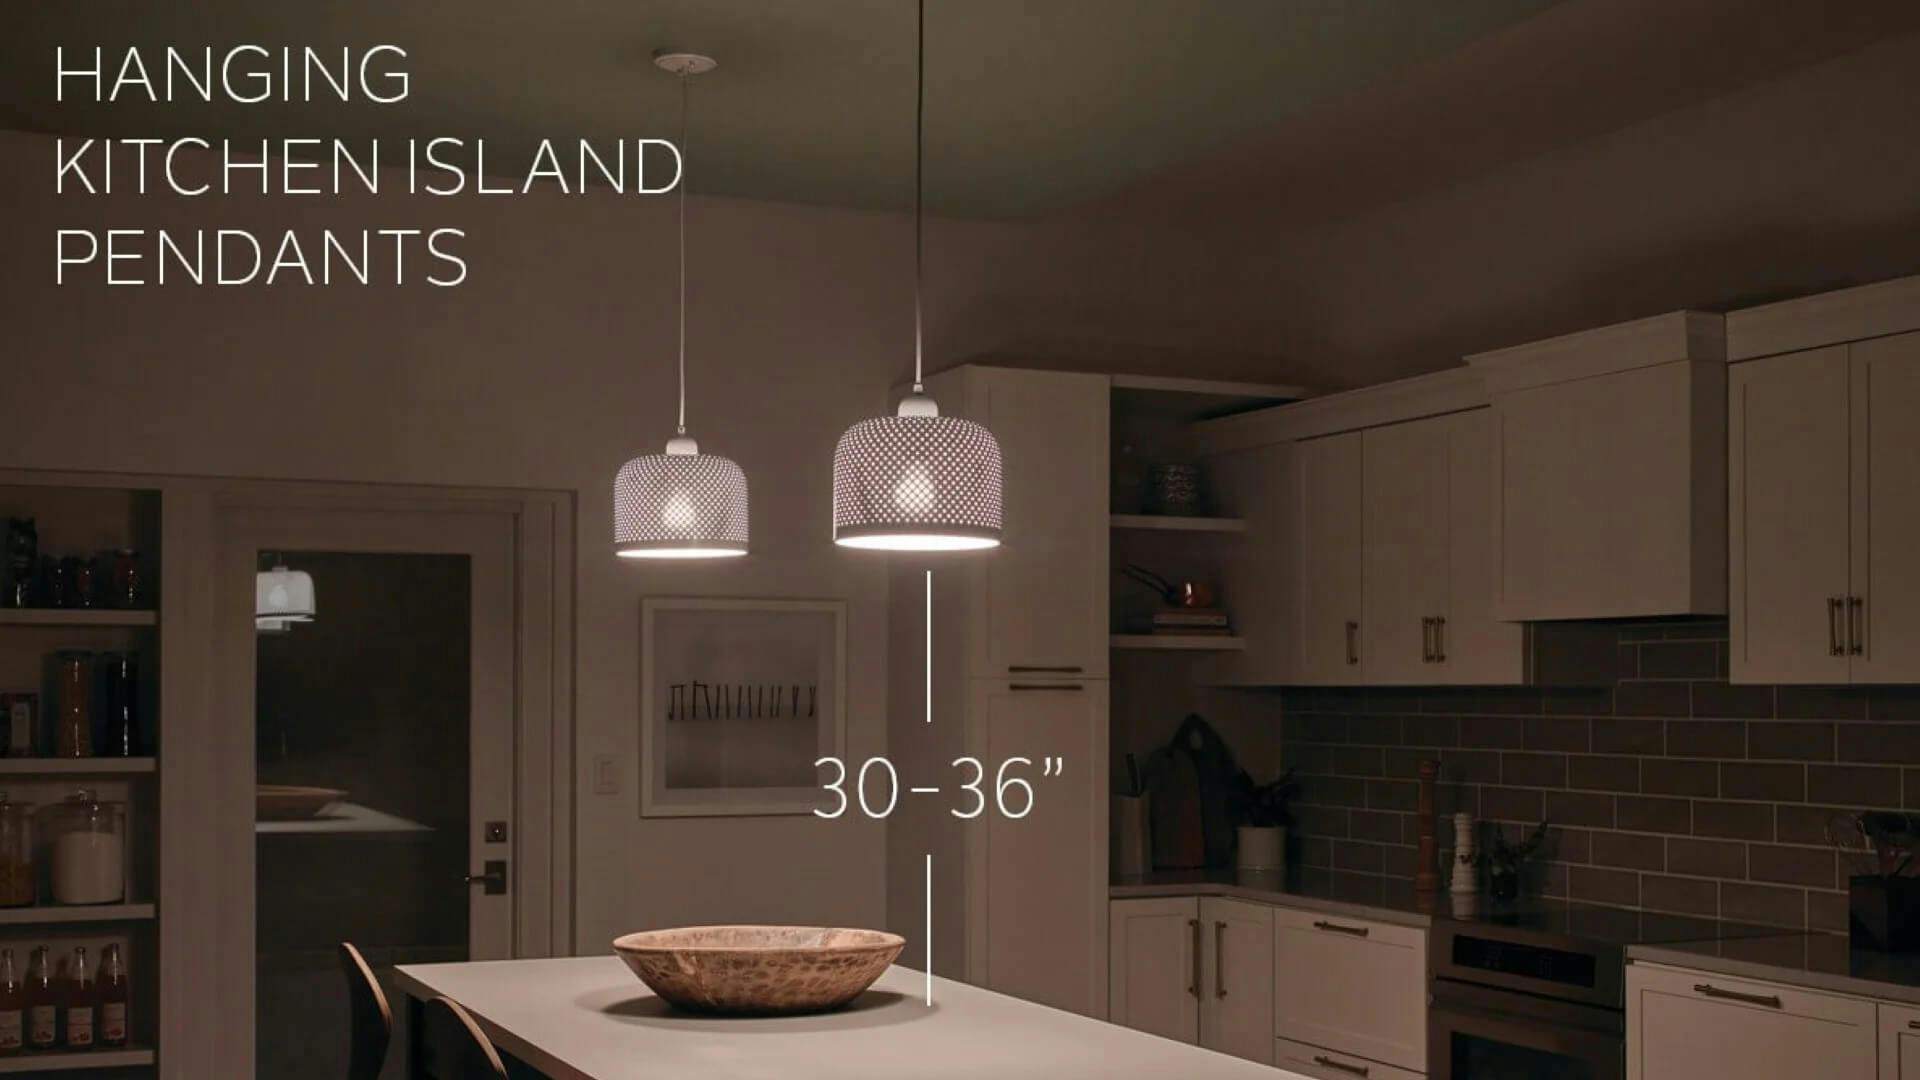 Two hanging pendants over a kitchen island with text showing they're 30-36" above the surface